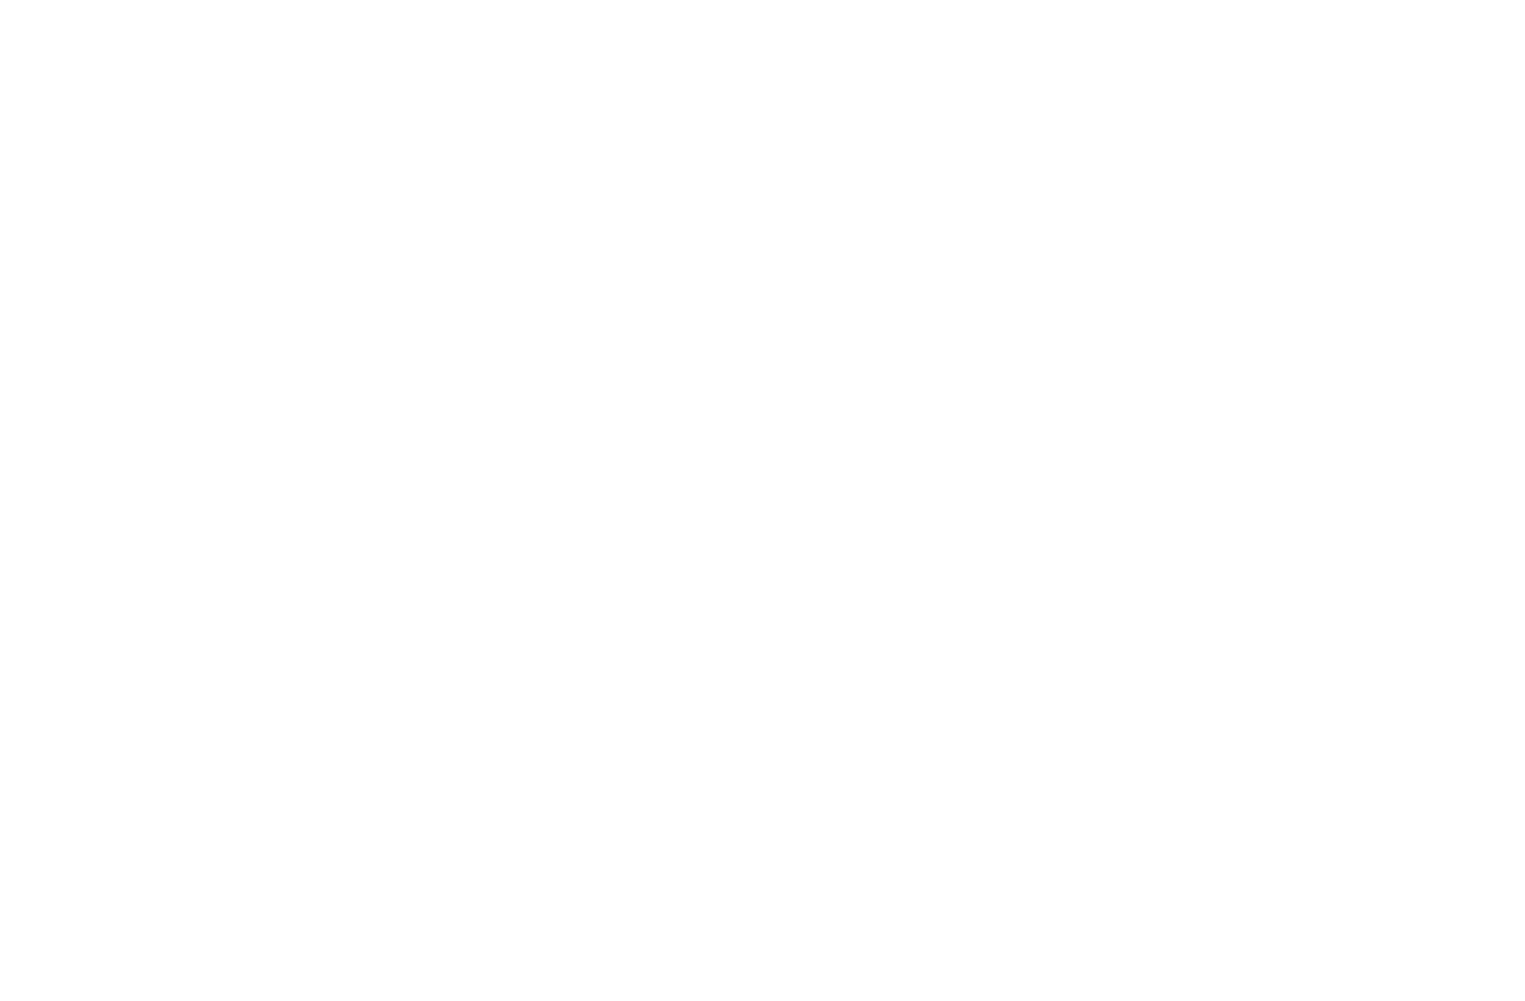 Angling with Adria Charters - Fishing Charters and Boat Tours Venice, FL